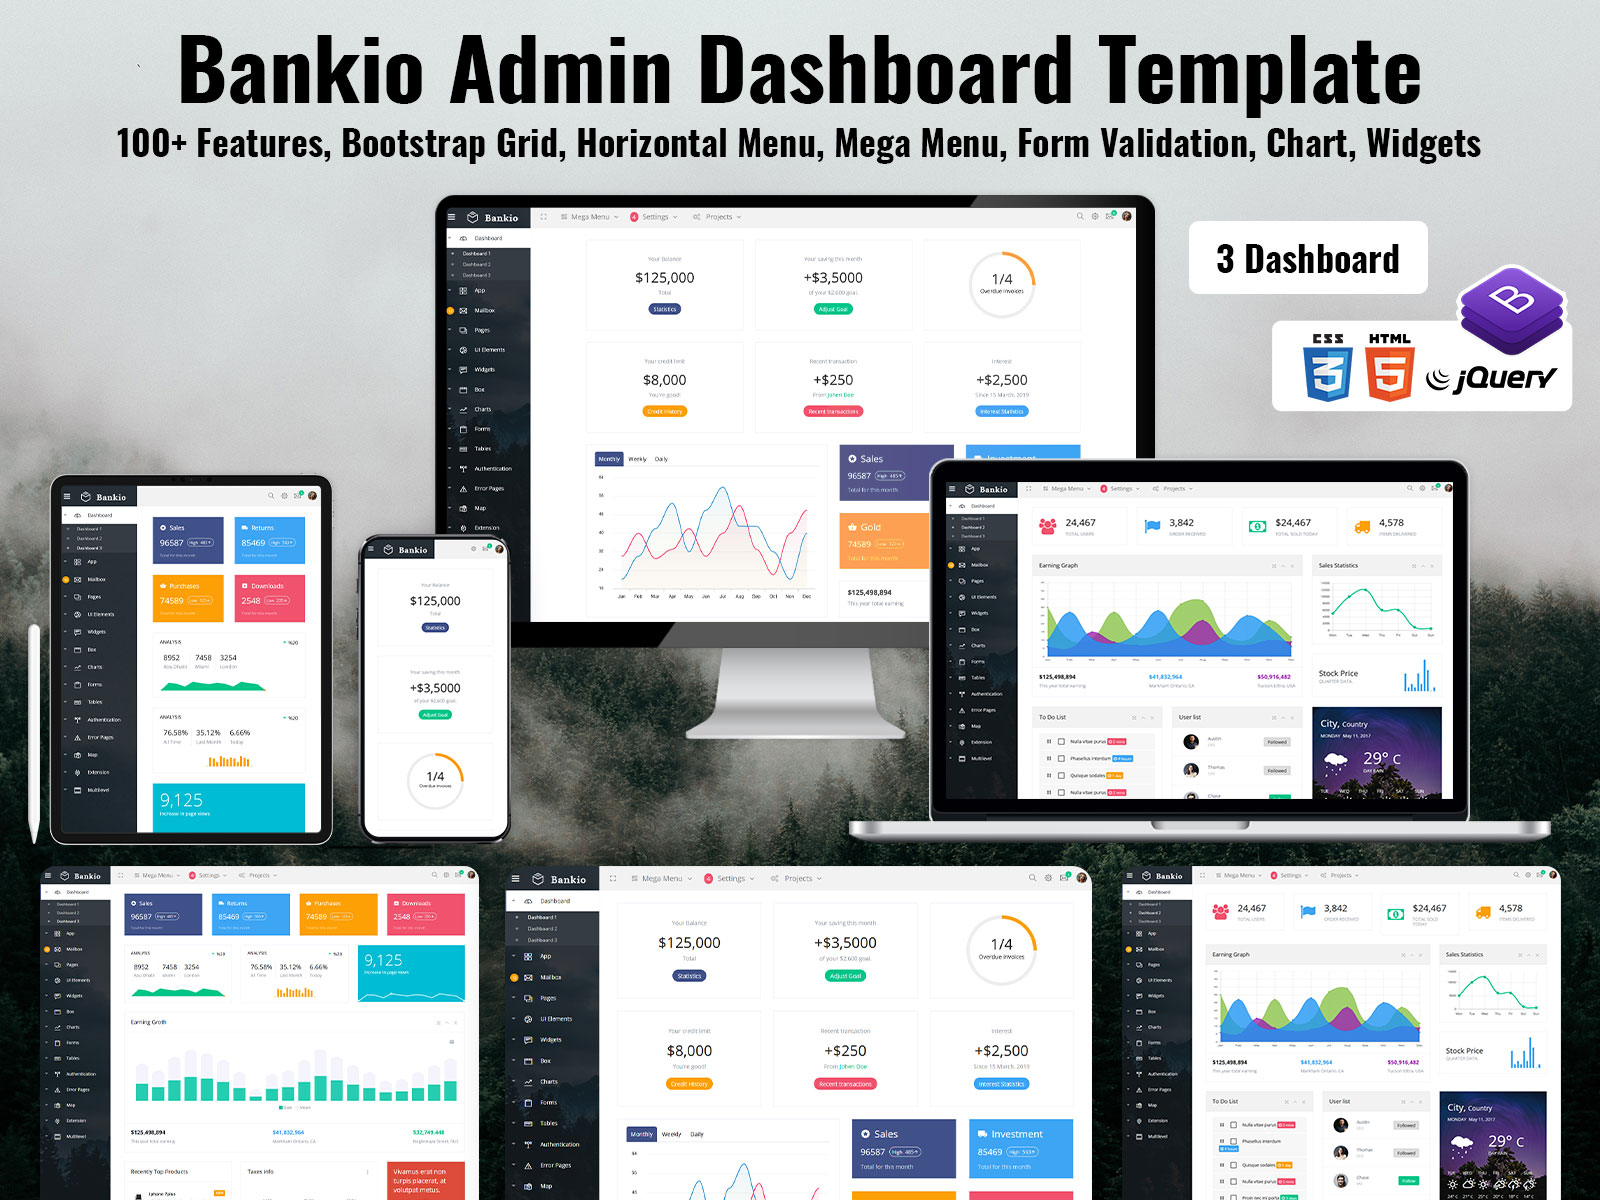 Bankio – Check Best Bootstrap Admin Template To Make Your Website